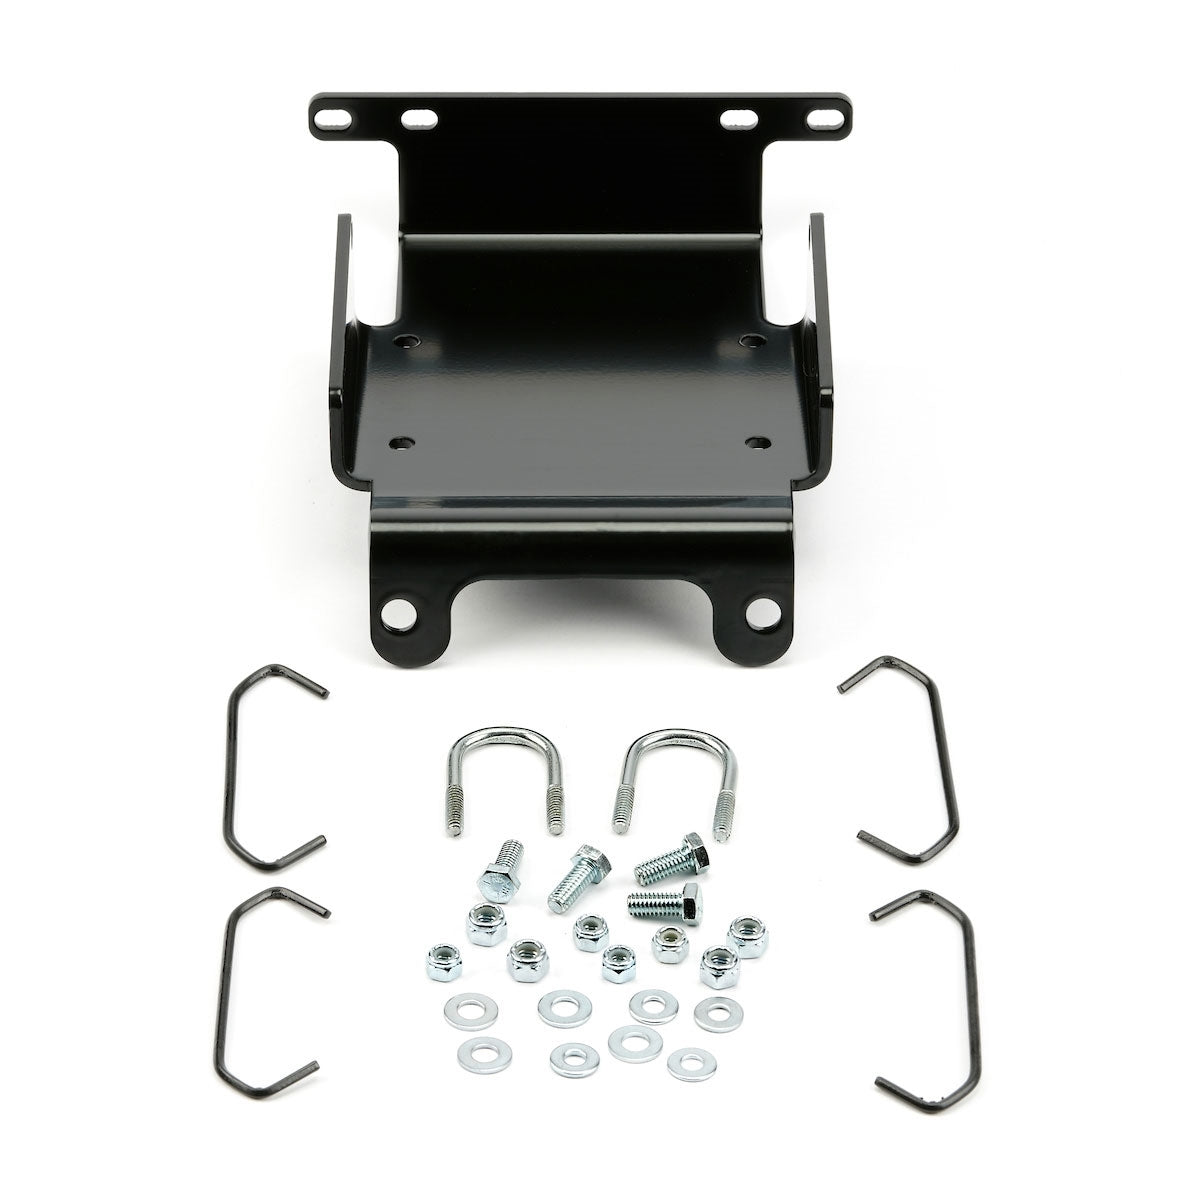 Winch Mount for Suzuki King Quad & Quad Racer 2008 to 2019 - suitable for the VRX 25 and VRX 35